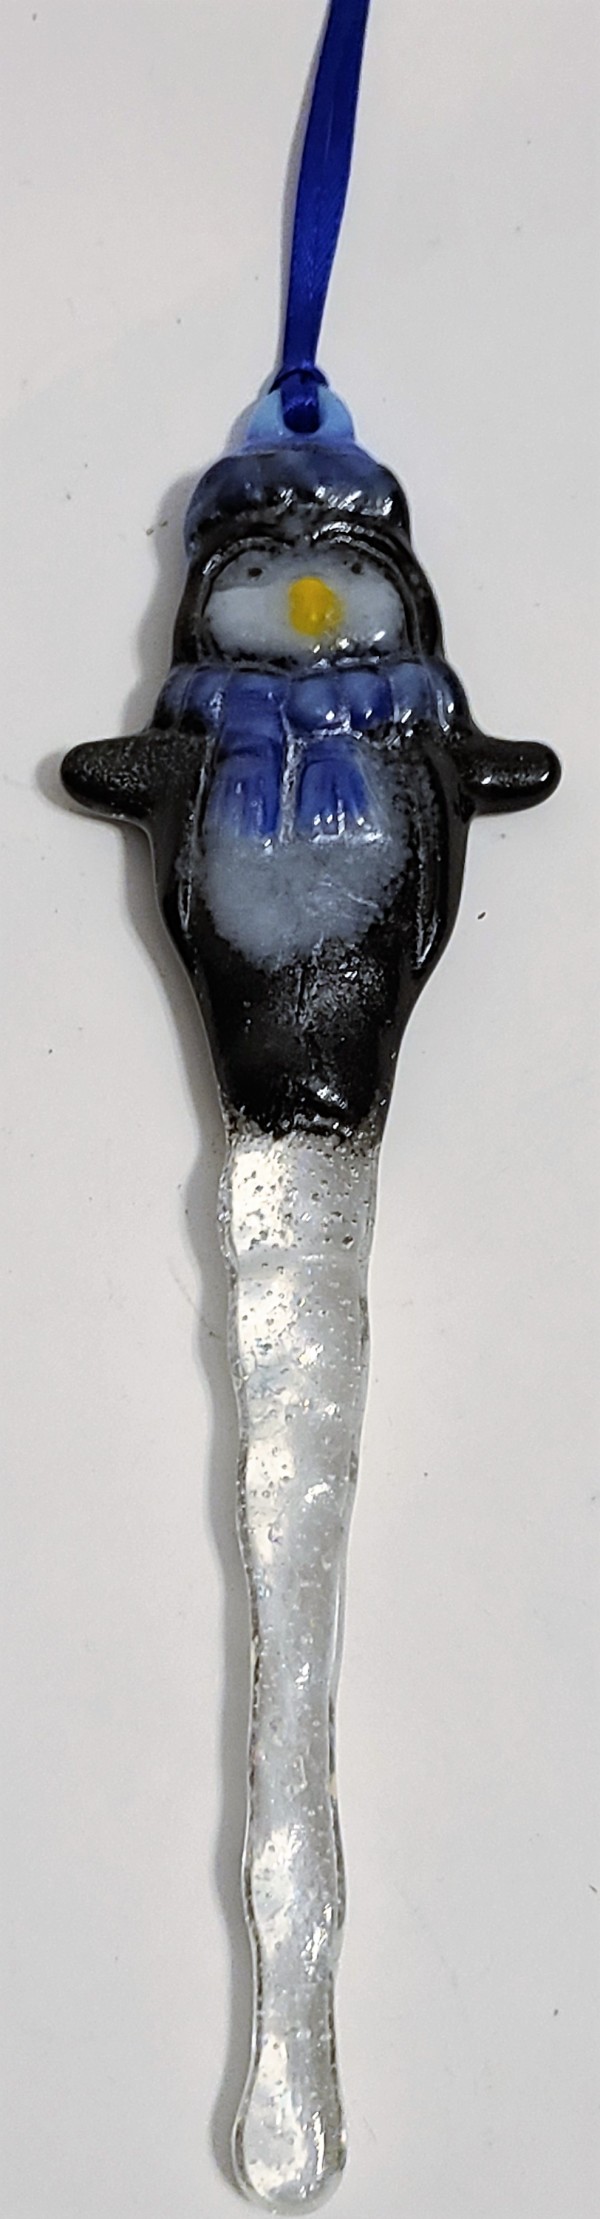 Penguin Icicle Ornament by Kathy Kollenburn